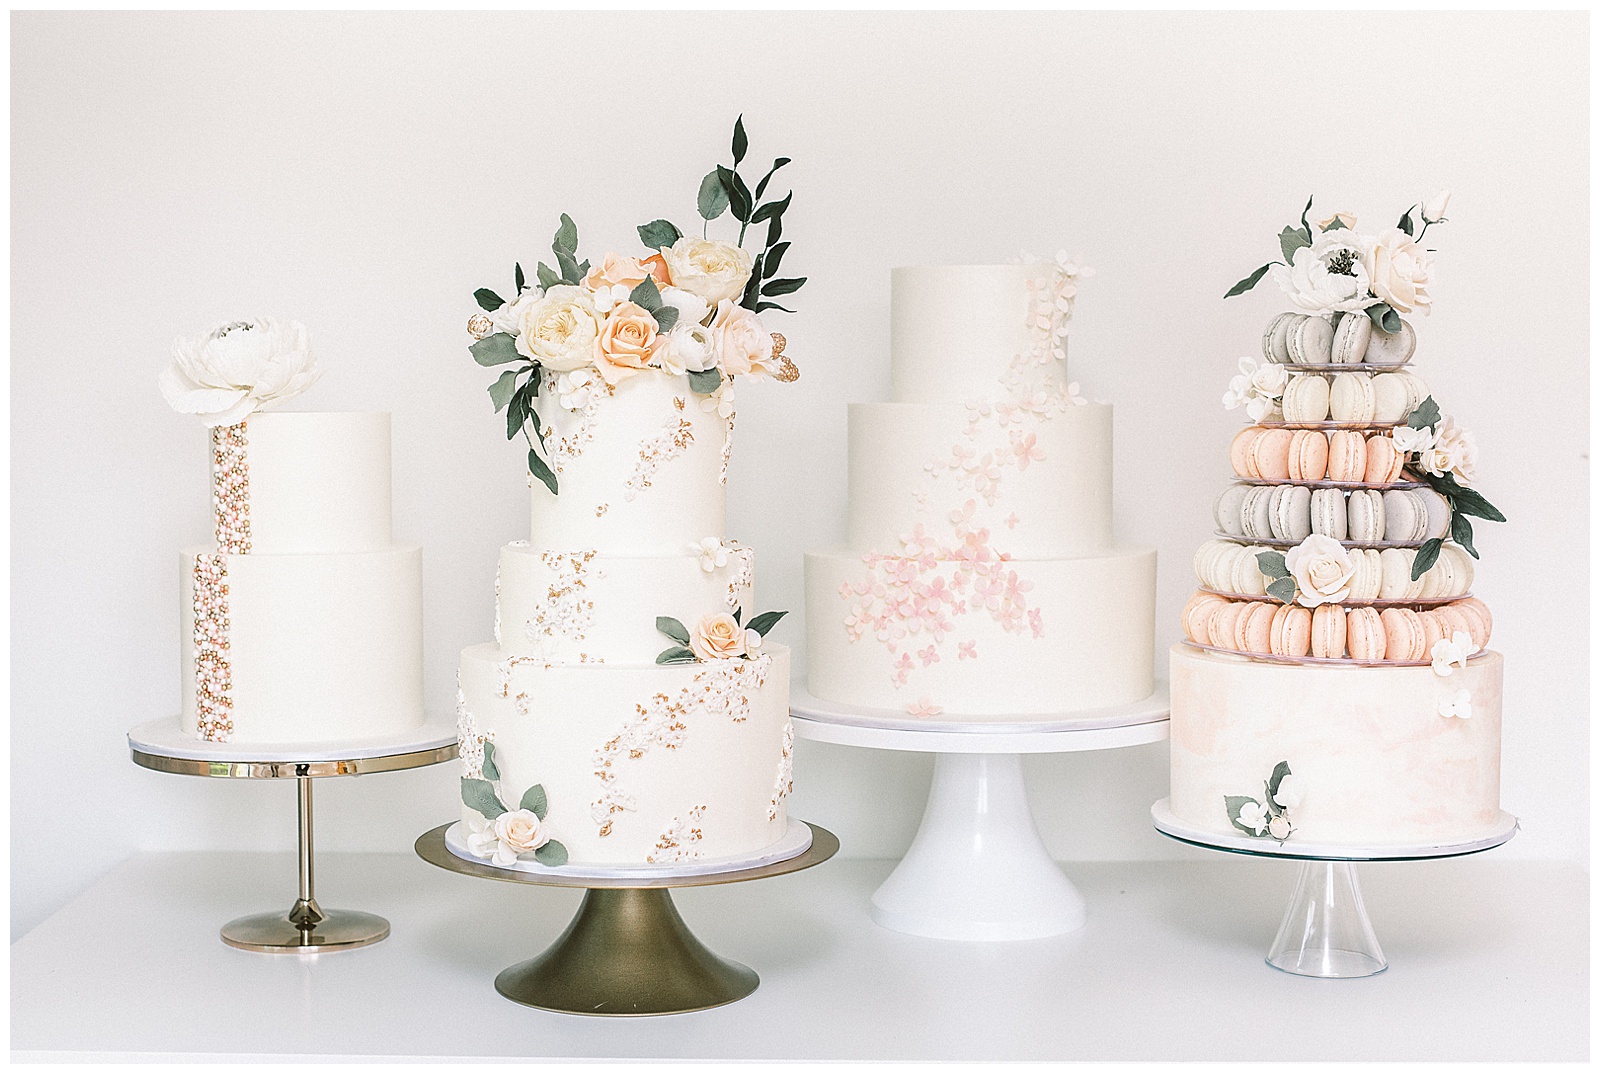 Delish Cakery Brand and Food Photography of Sugar Flower Tiered Fondant White Wedding Cakes